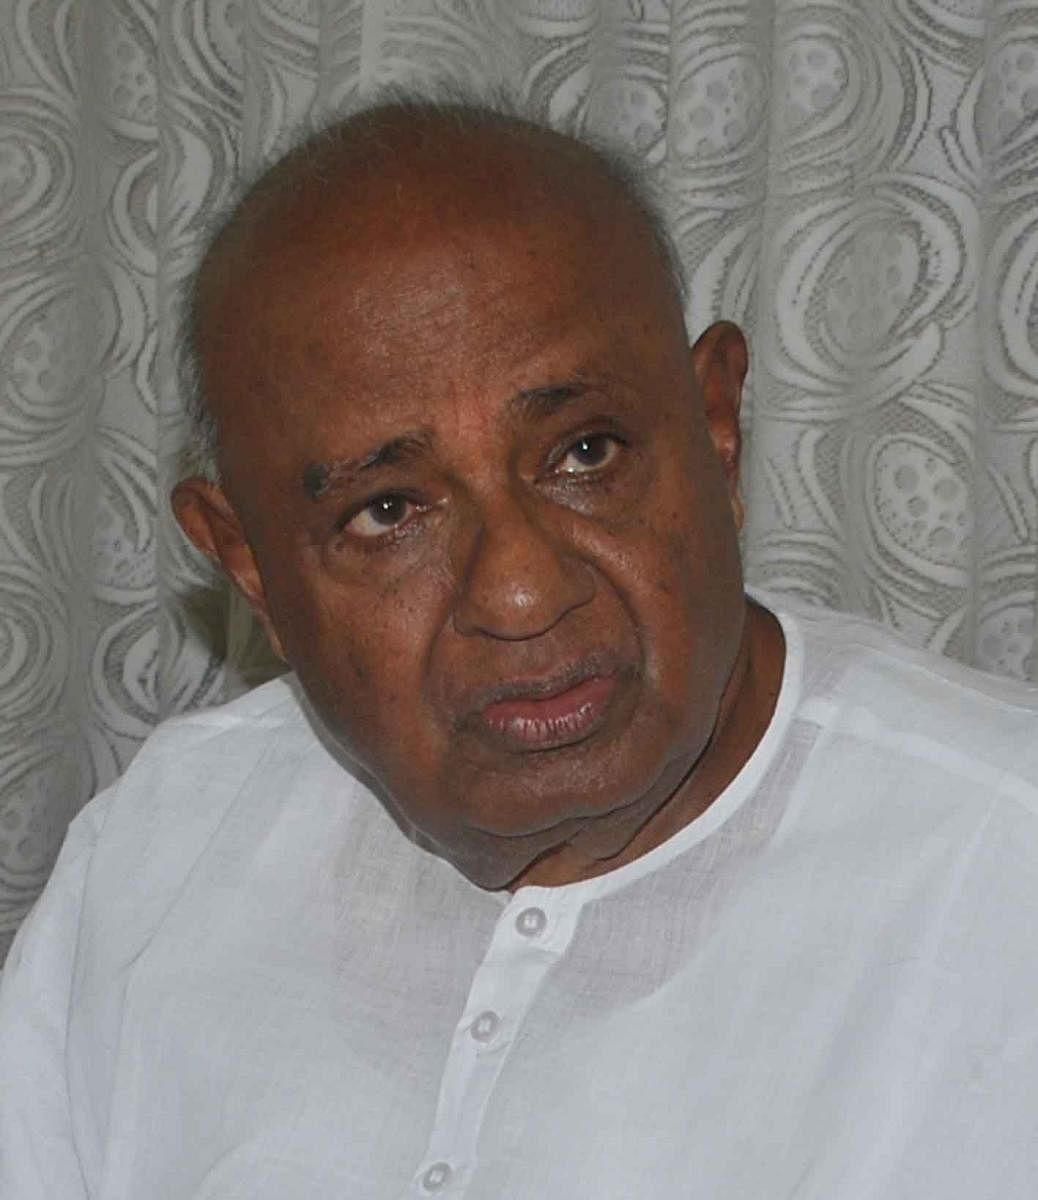 JD(S) ready to form pact with Cong: Gowda